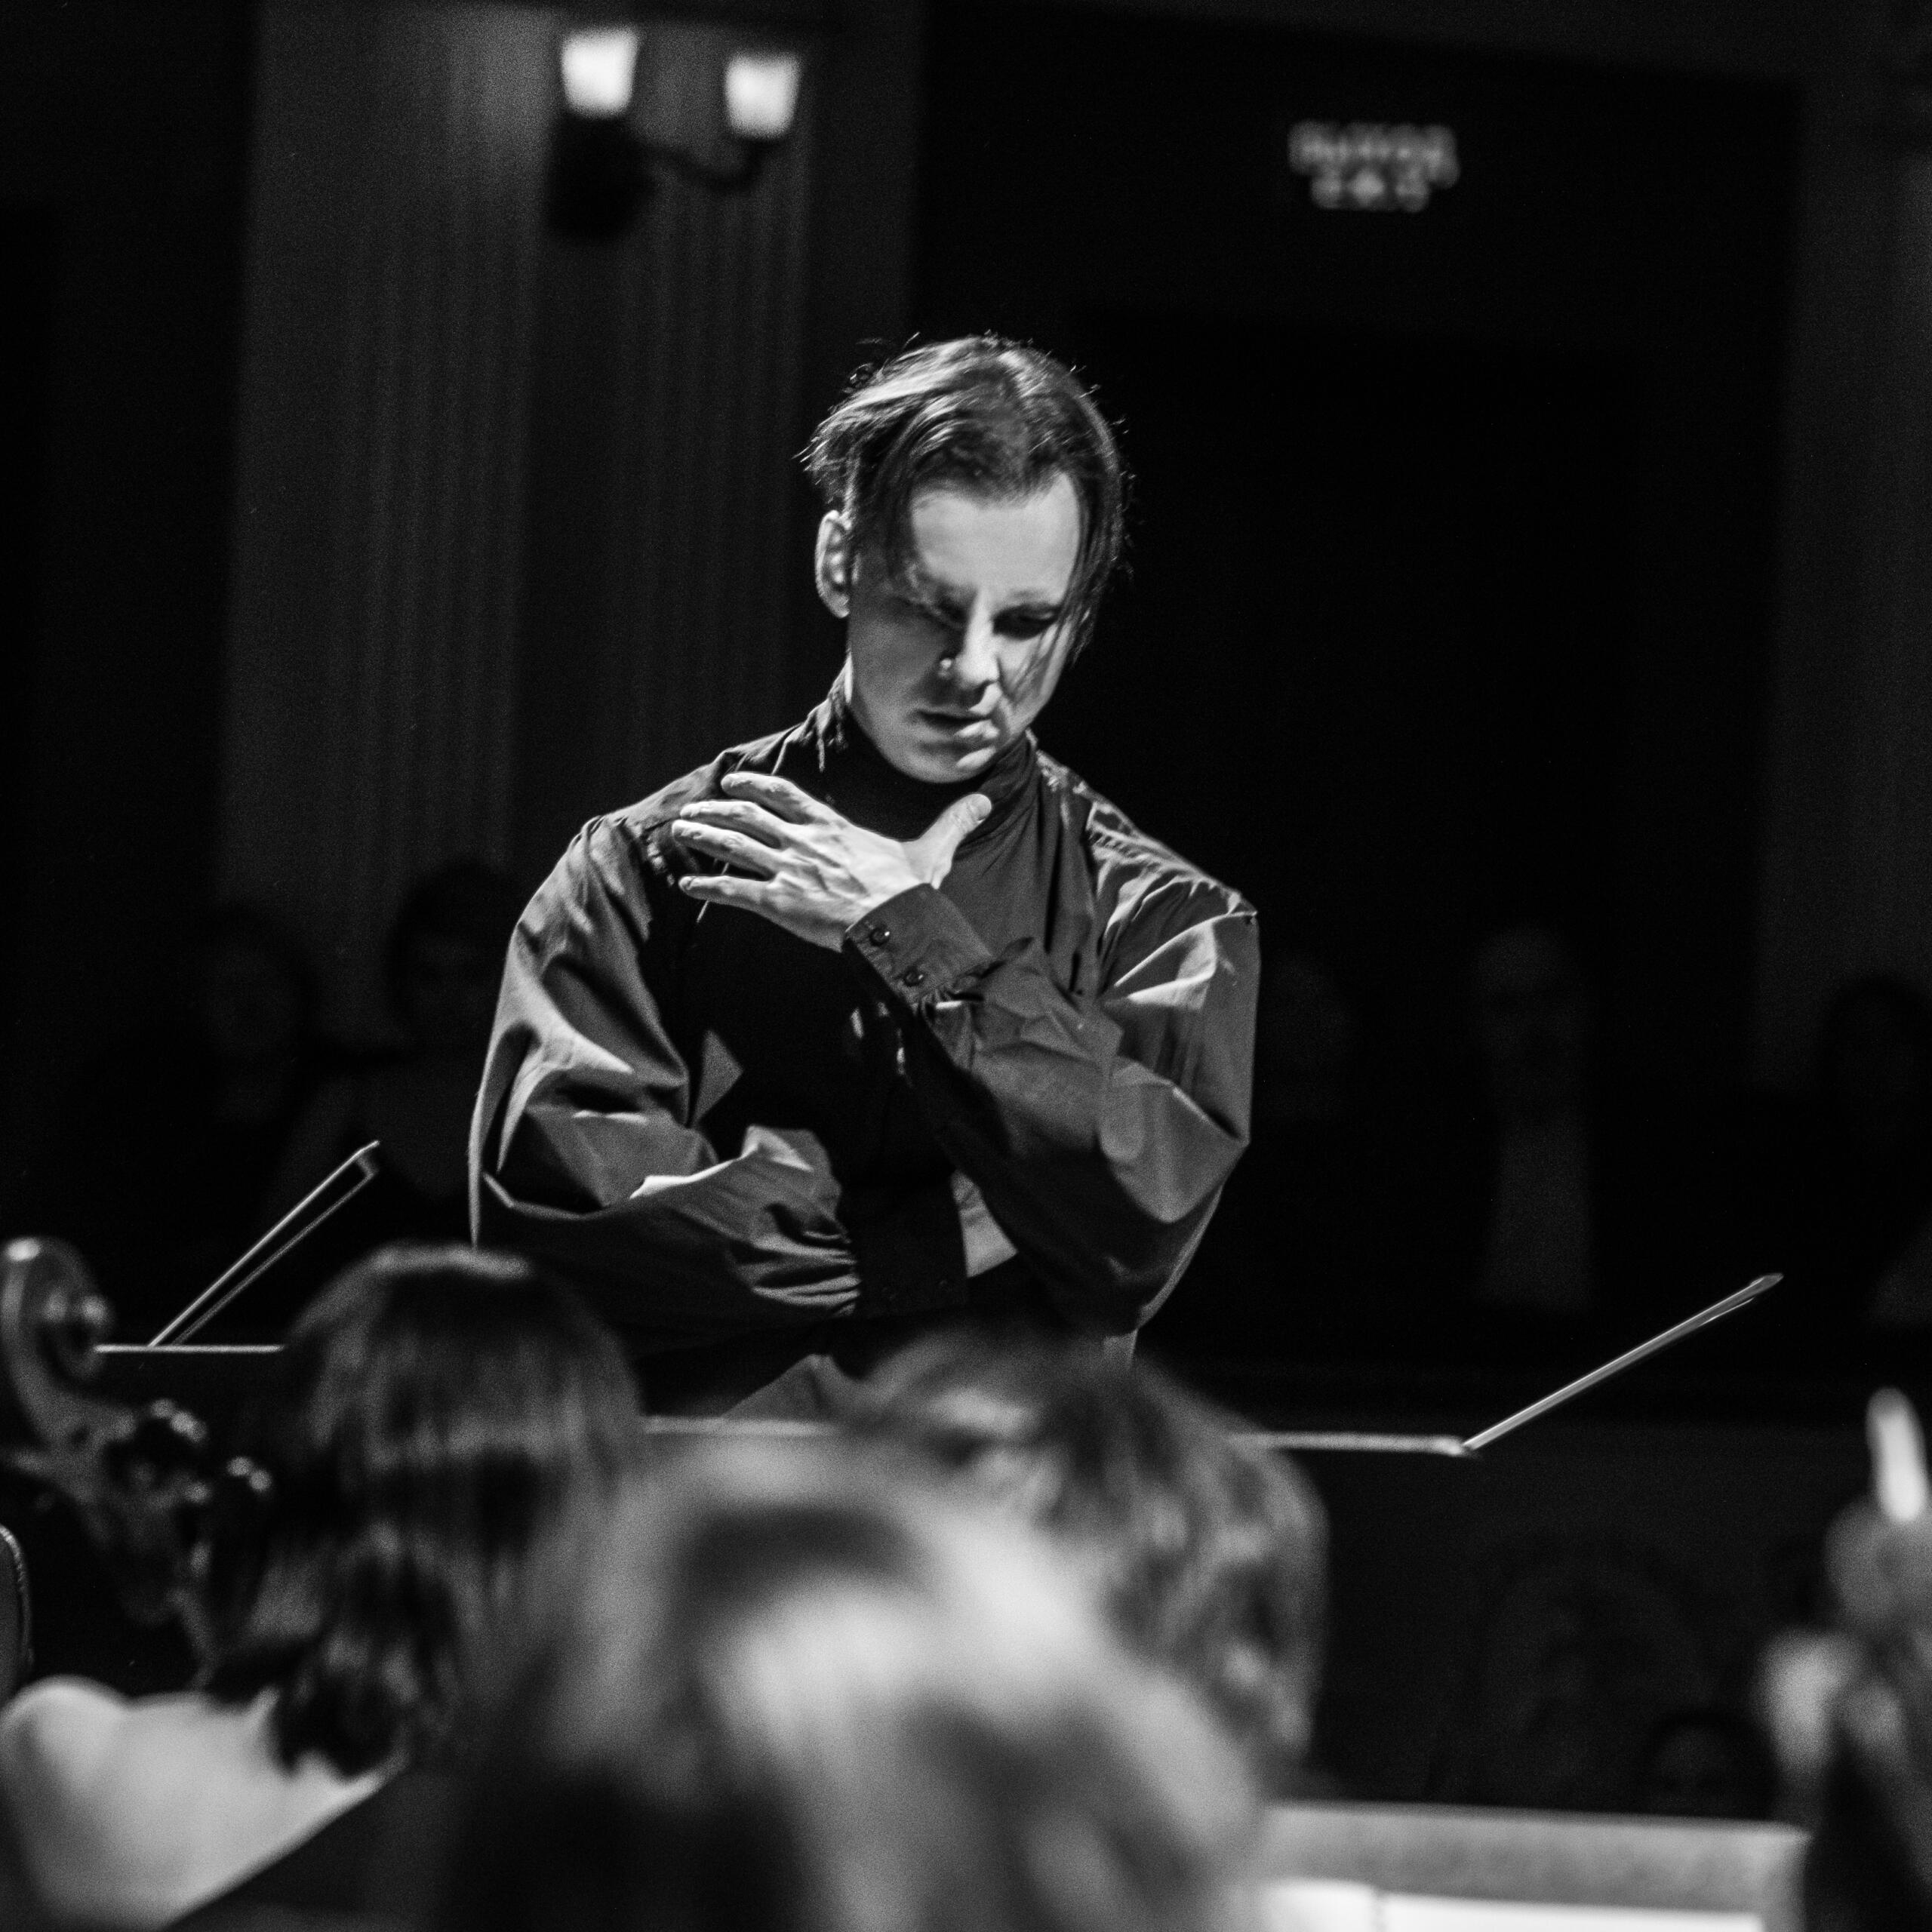 A black-and-white portrait of the conductor Teodor Currentzis.